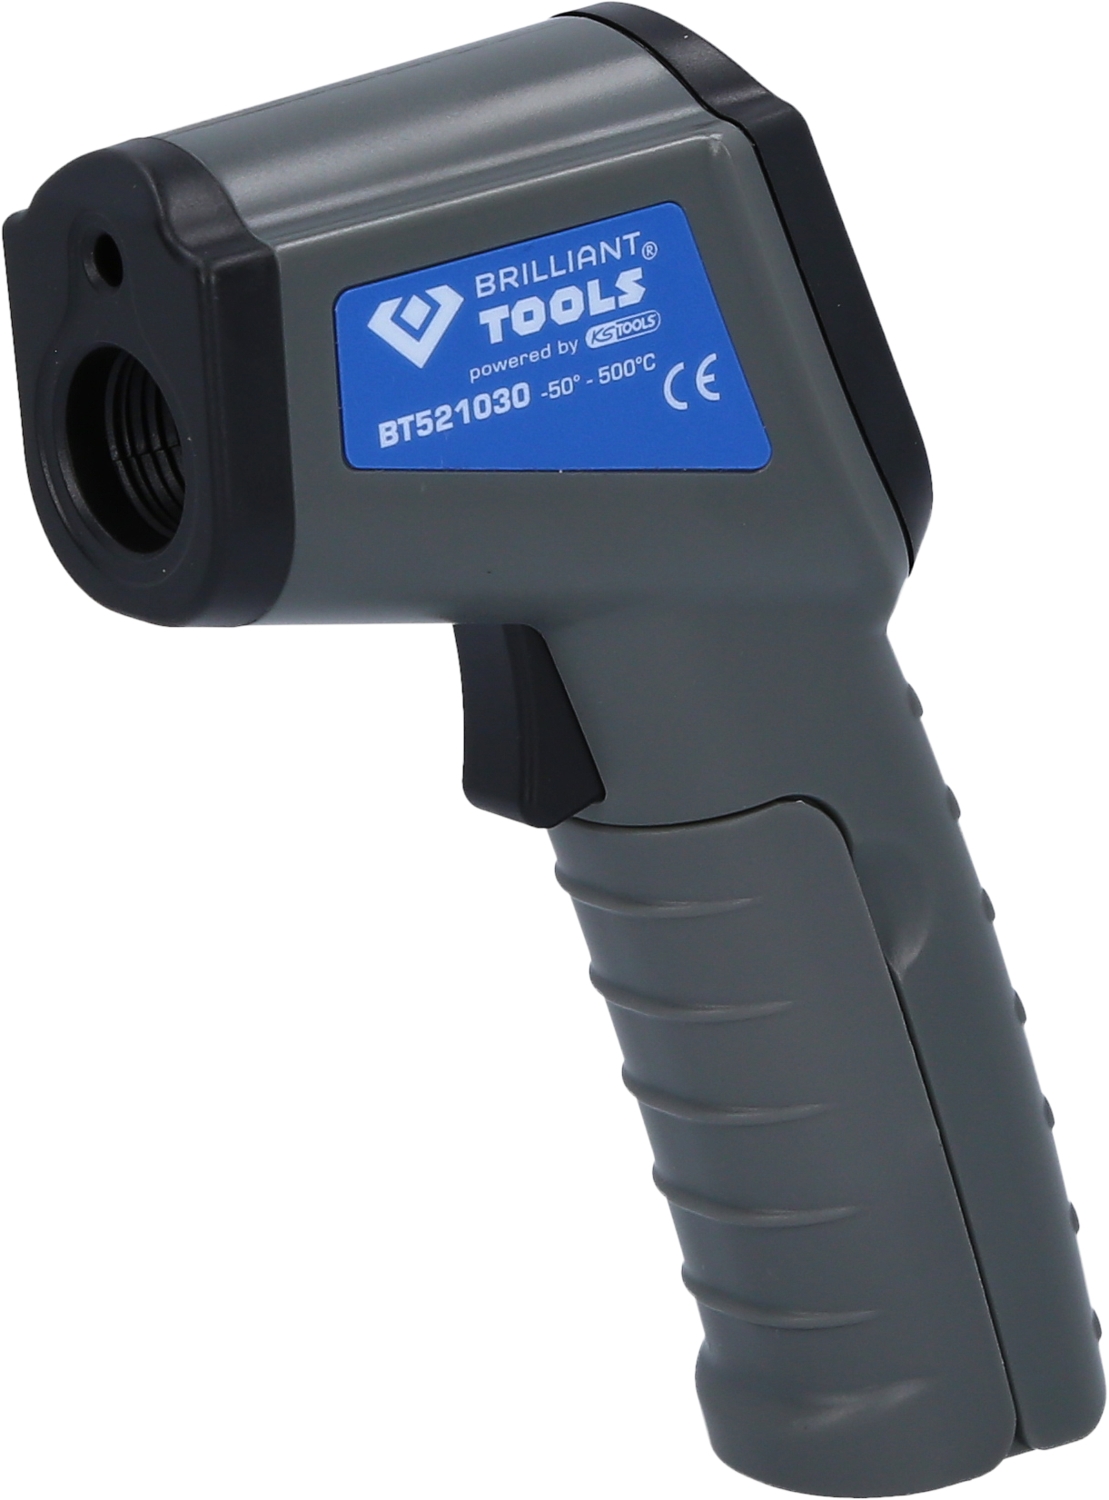 Brilliant Tools  Infrarot-Thermometer, -50° bis 500°